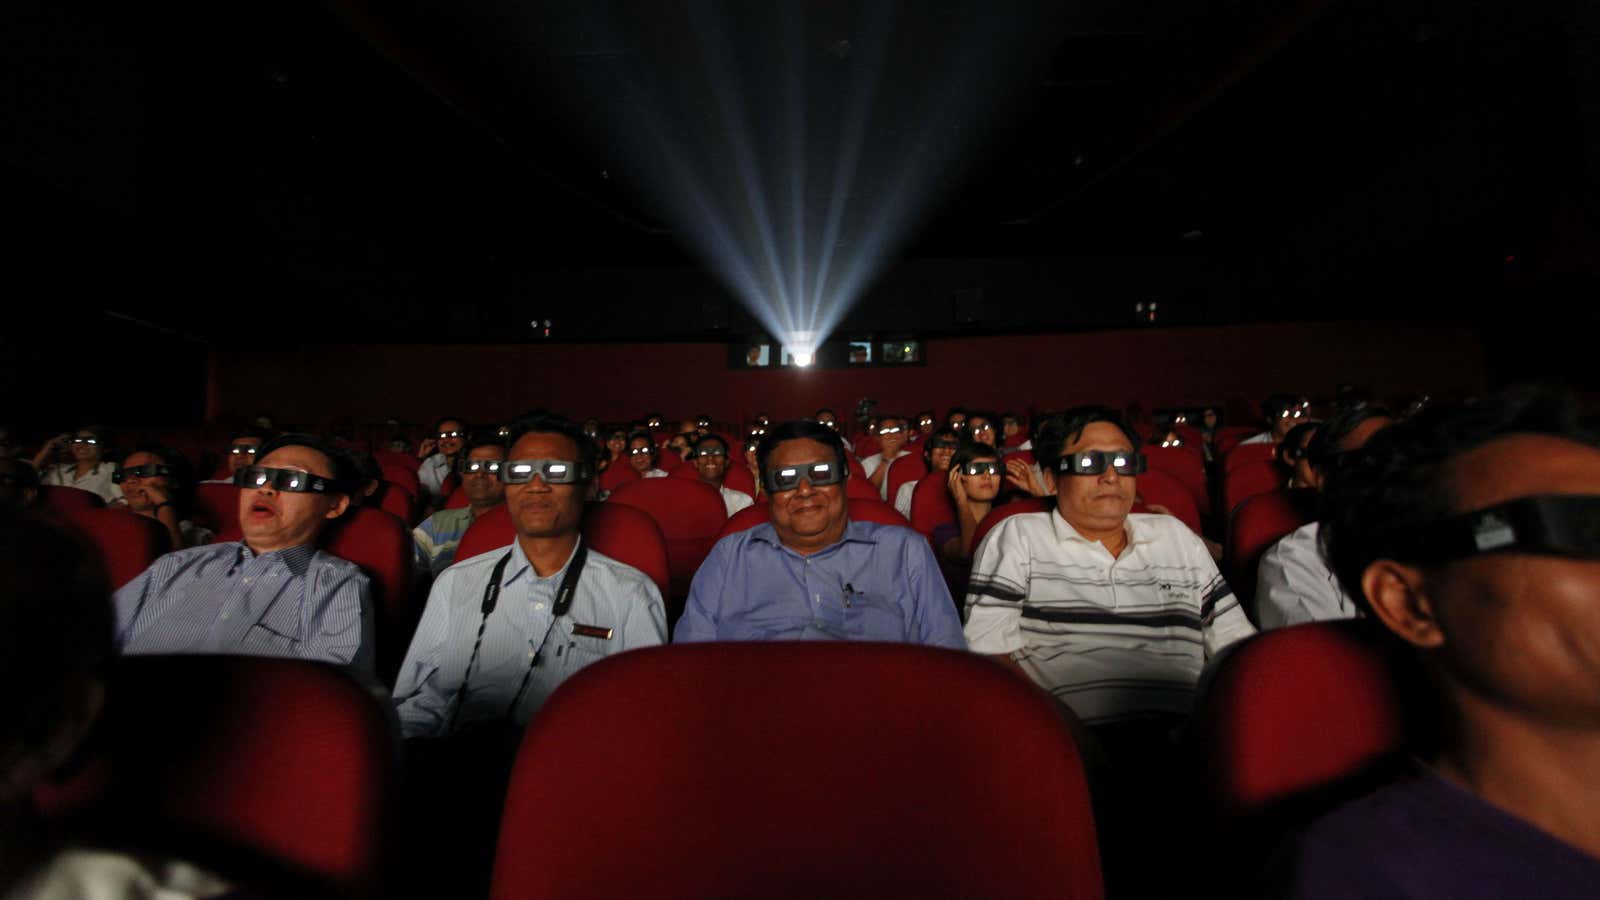 Movie theaters are getting a lot more luxurious.